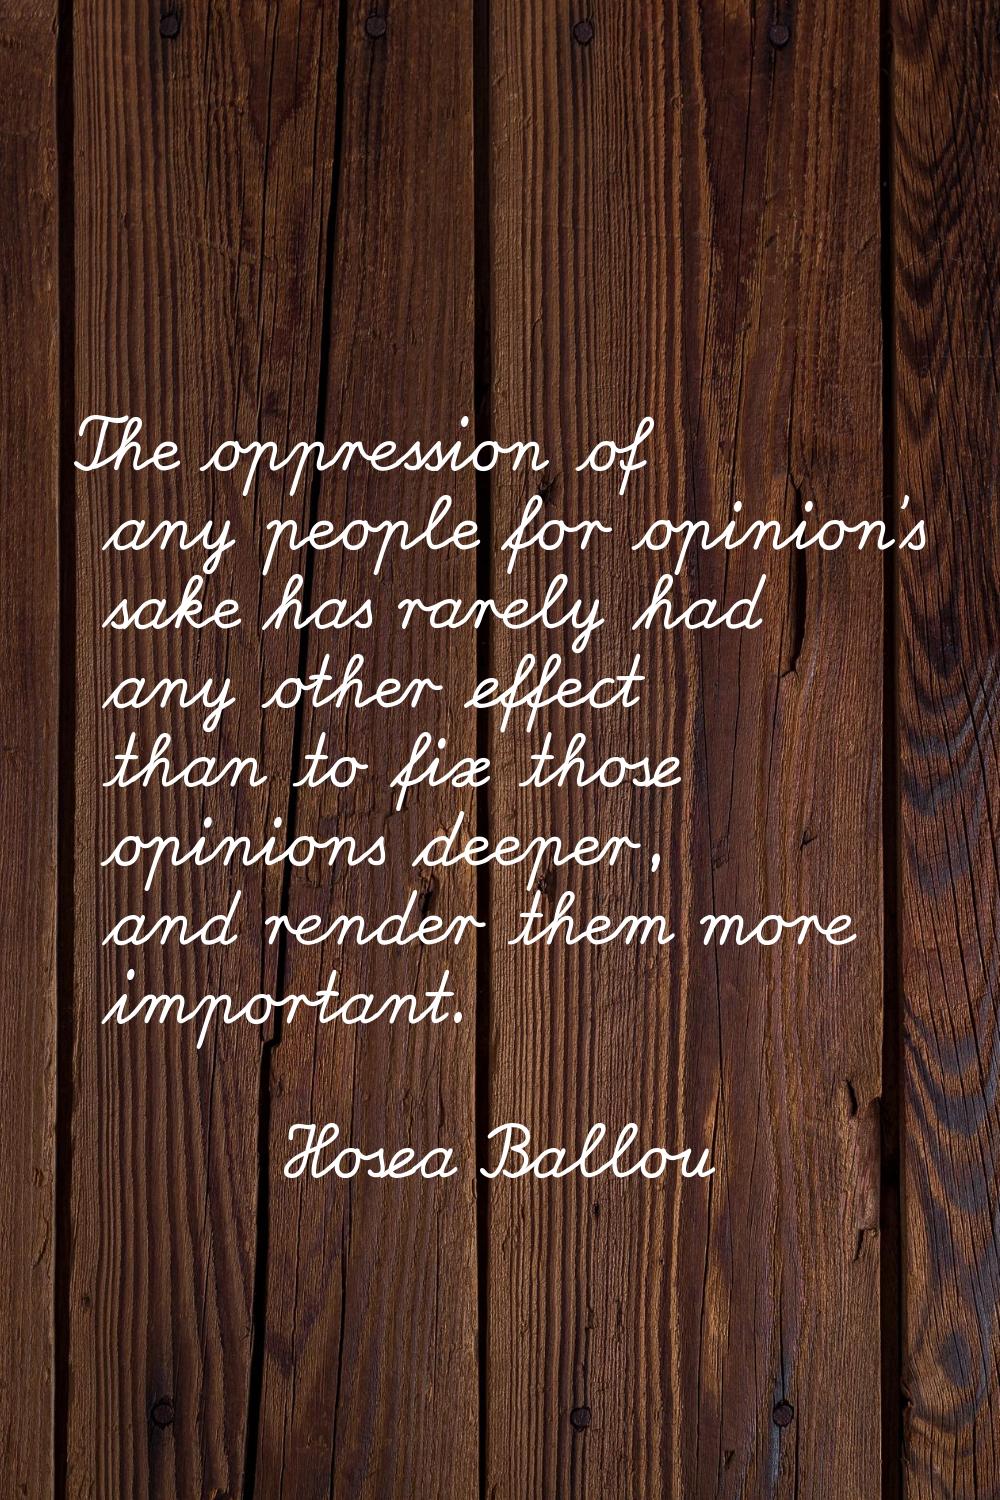 The oppression of any people for opinion's sake has rarely had any other effect than to fix those o